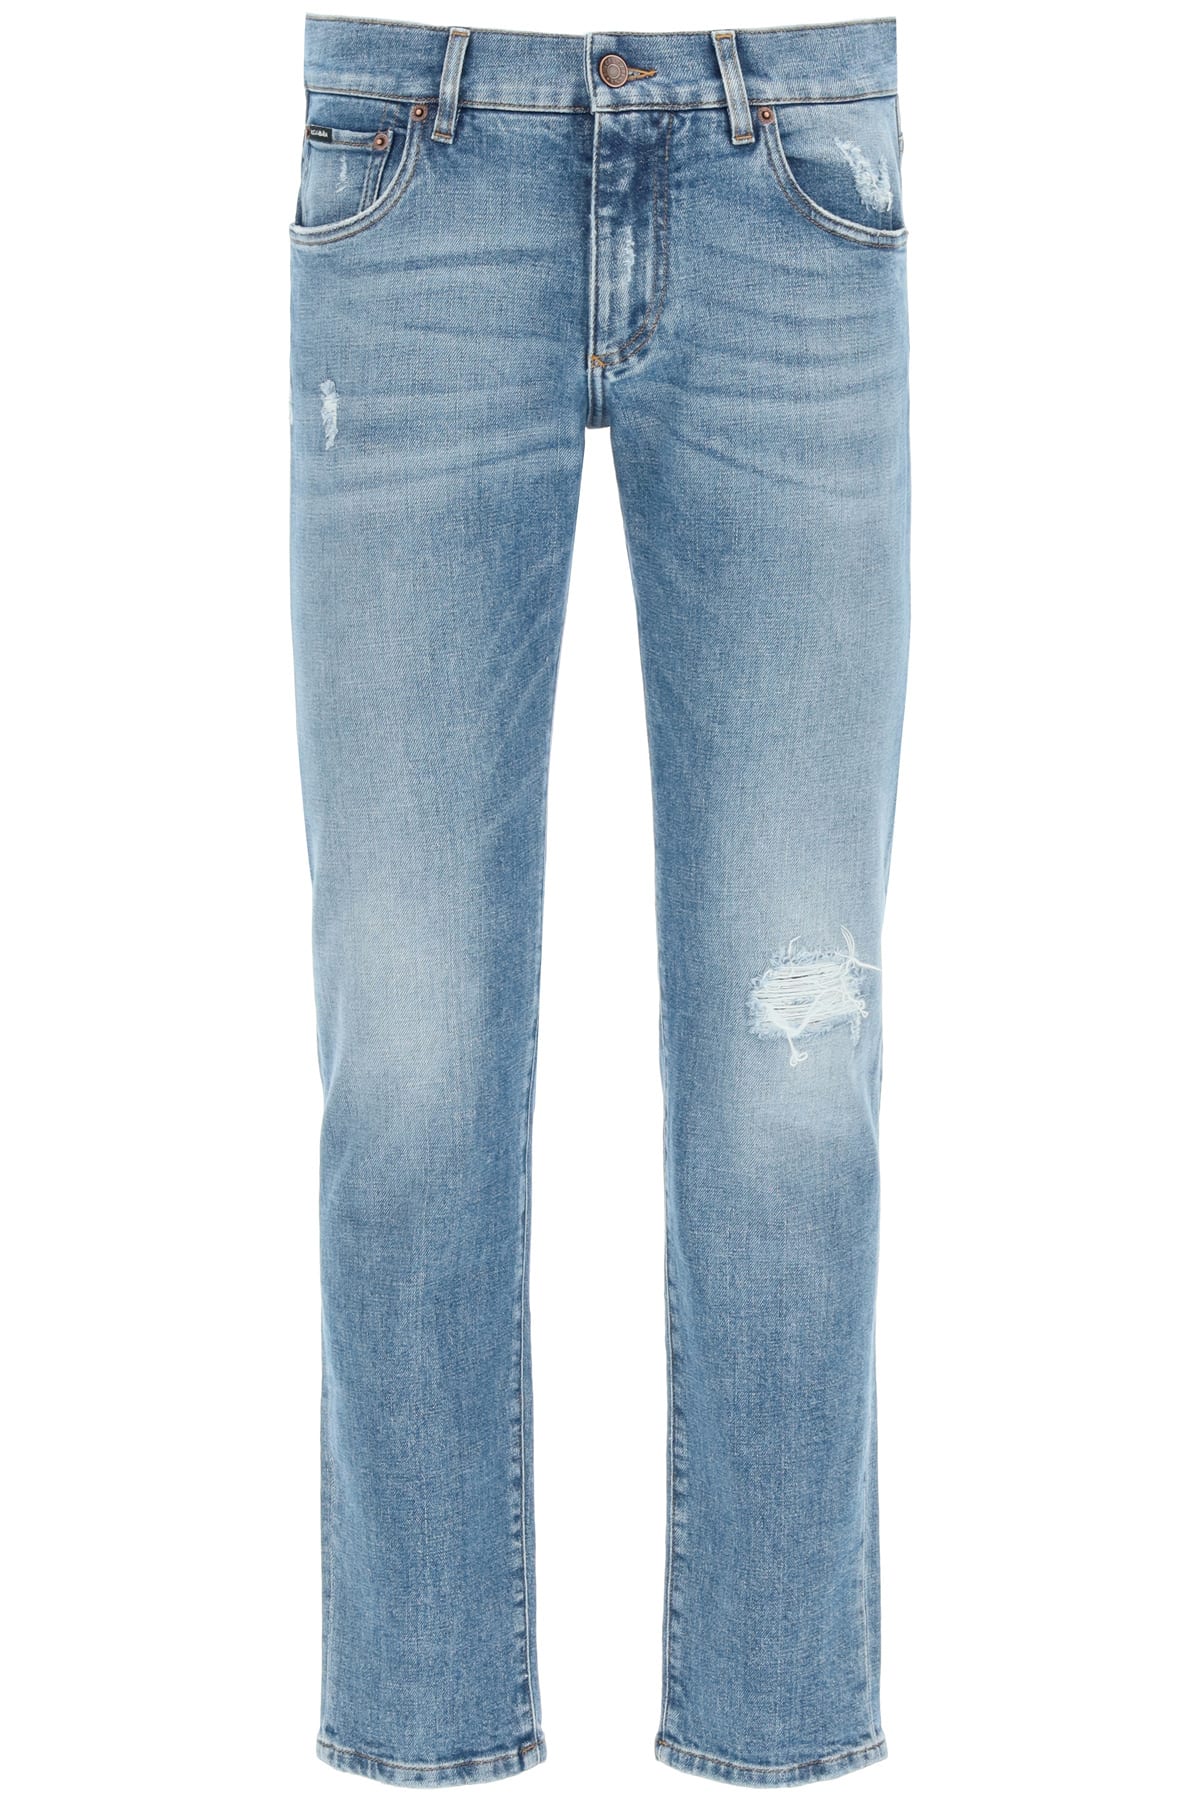 Dolce & Gabbana Slim Fit Jeans With Rips